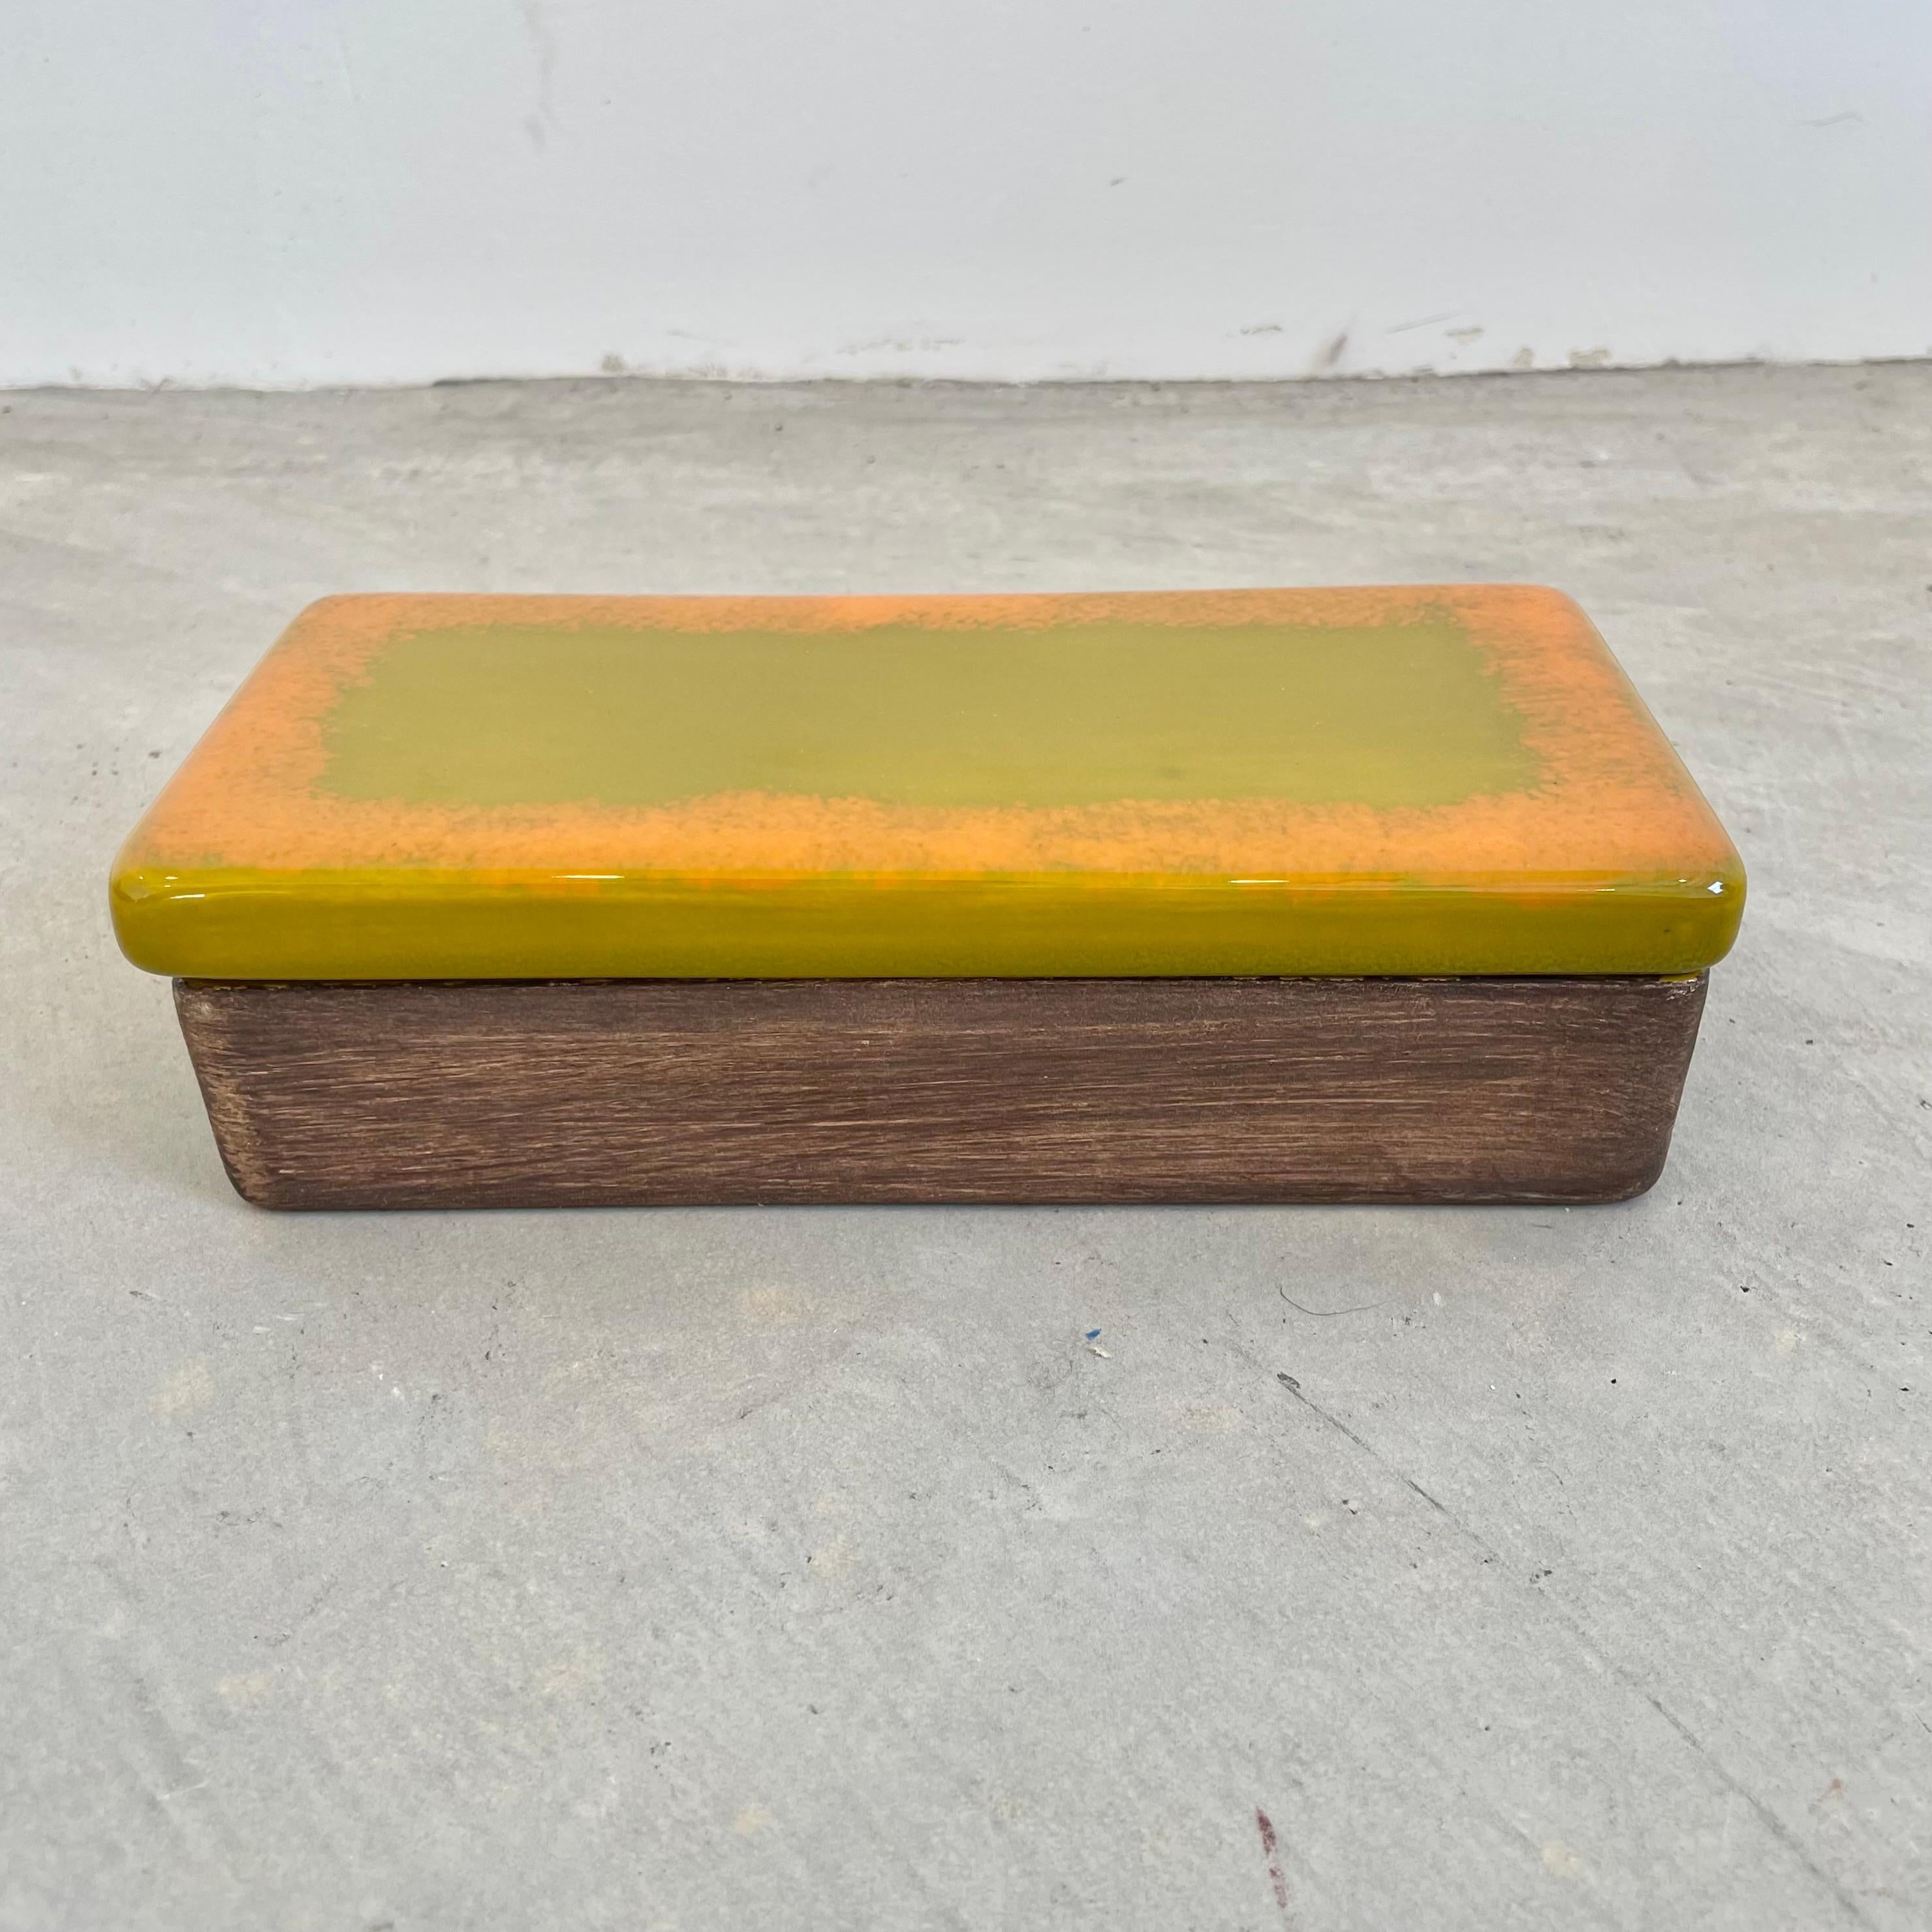 Glaze ceramic box made in Italy, circa 1970s. Slime green glaze along the top with an orange ring around the edge of the lid. Base is painted a matte brown. Green glaze covers the inside of the box. Great vintage condition. Fun stash box and